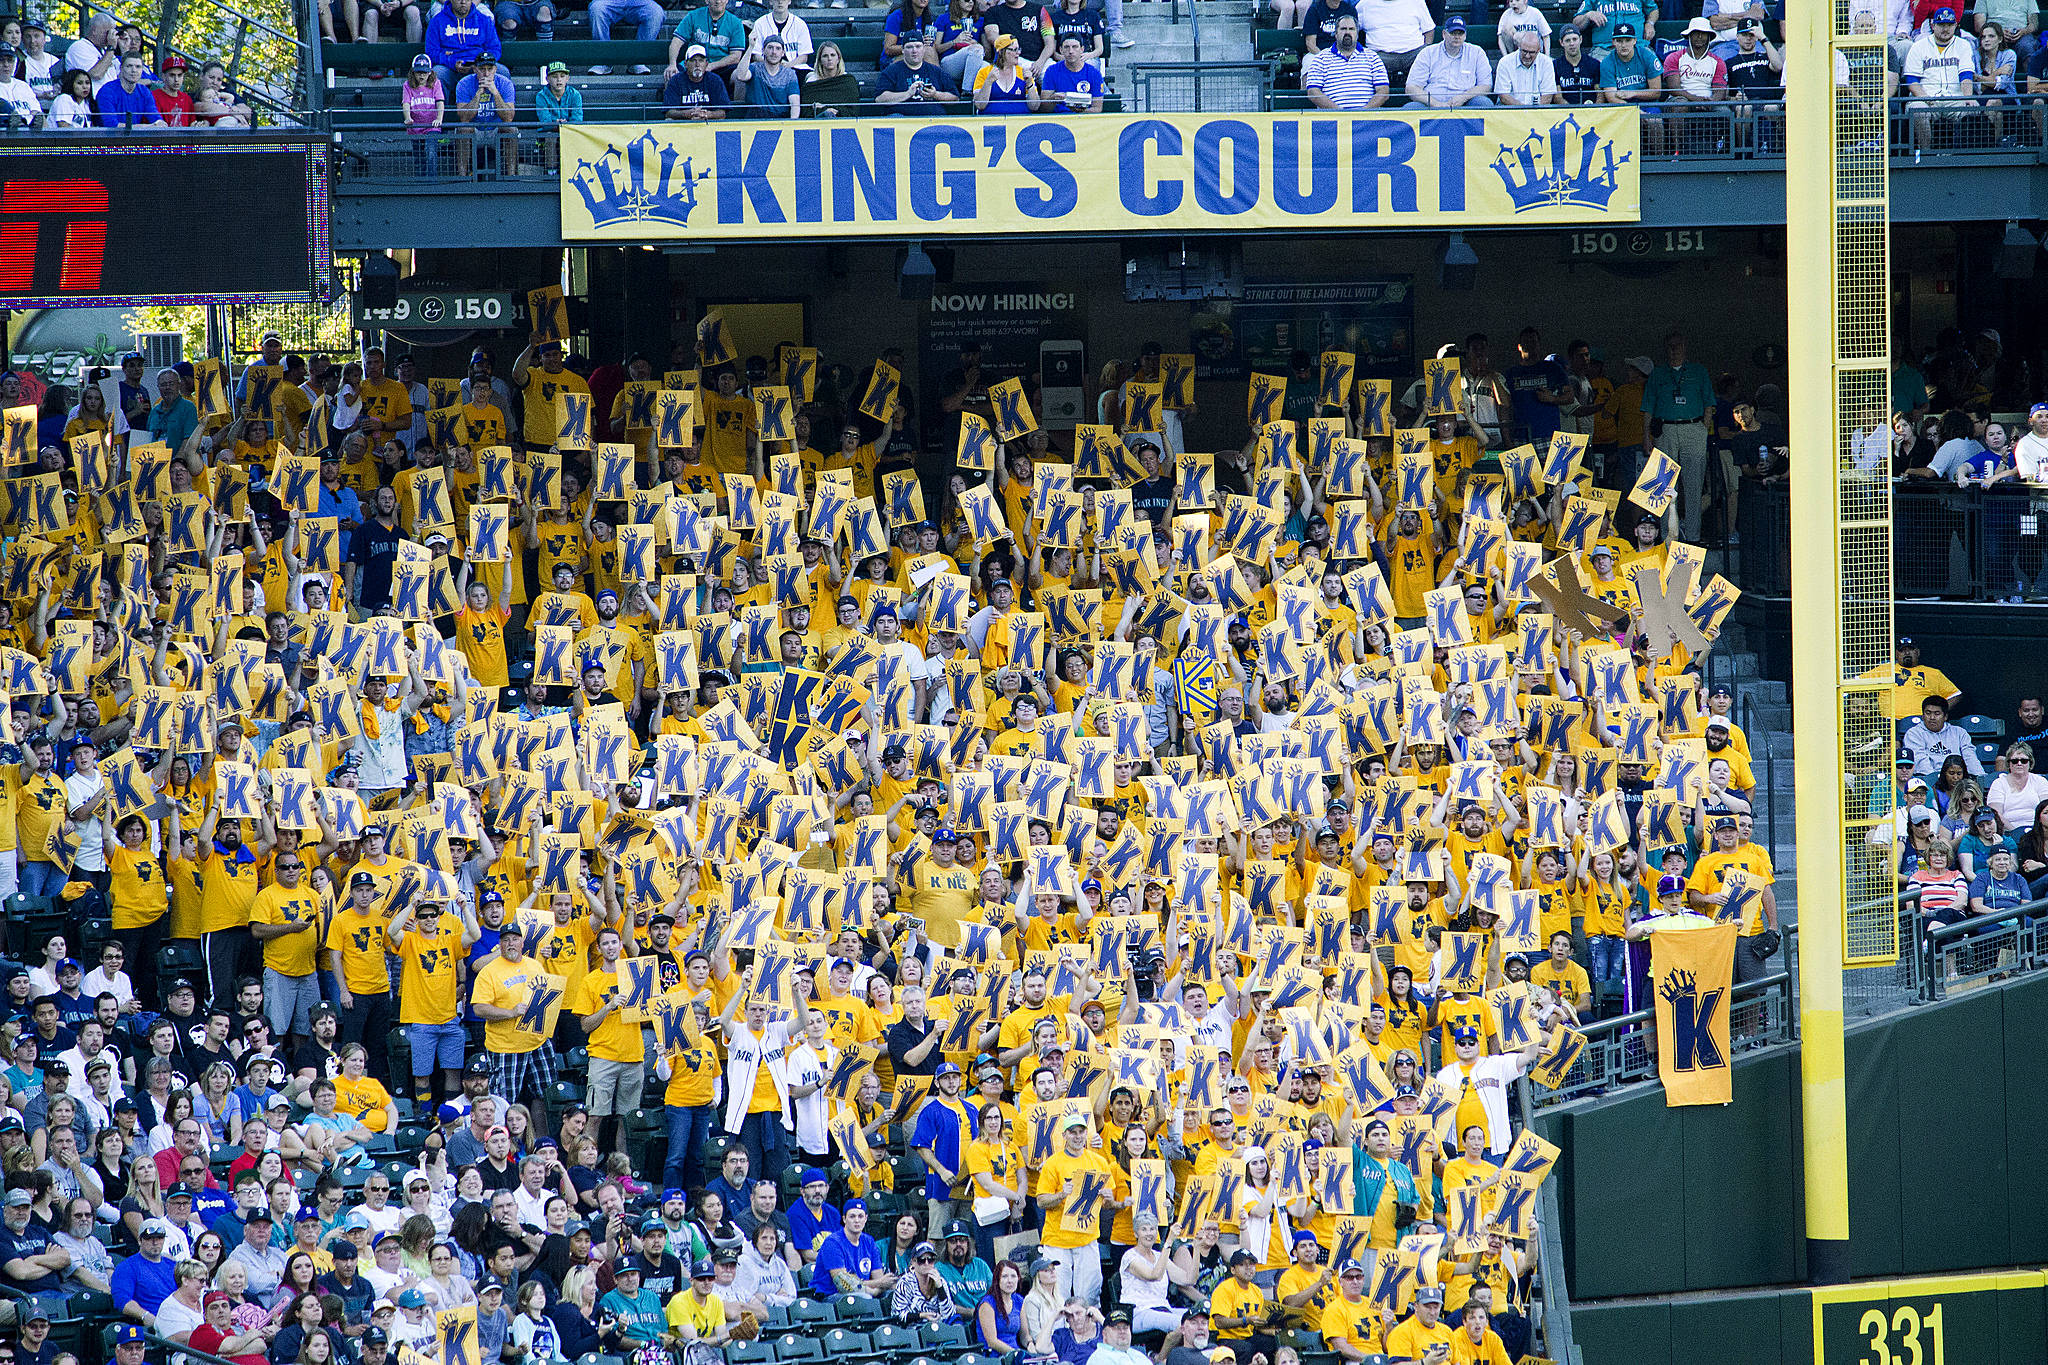 The King’s Court. Photo by Chase N./Flickr